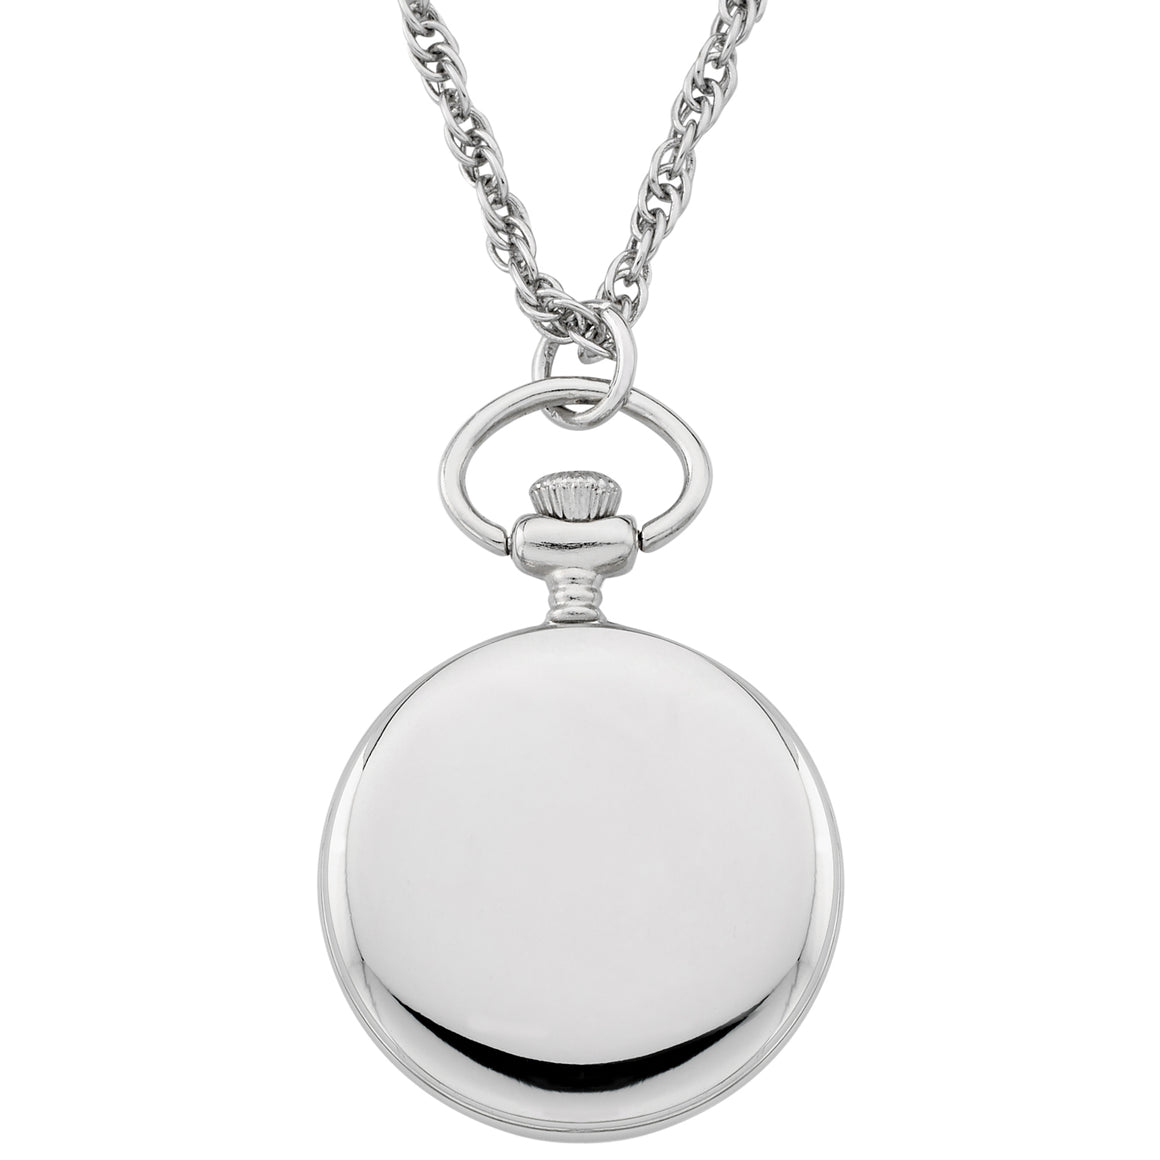 Gotham Women's Silver-Tone Open Face Pendant Watch with Chain # GWC14138SA